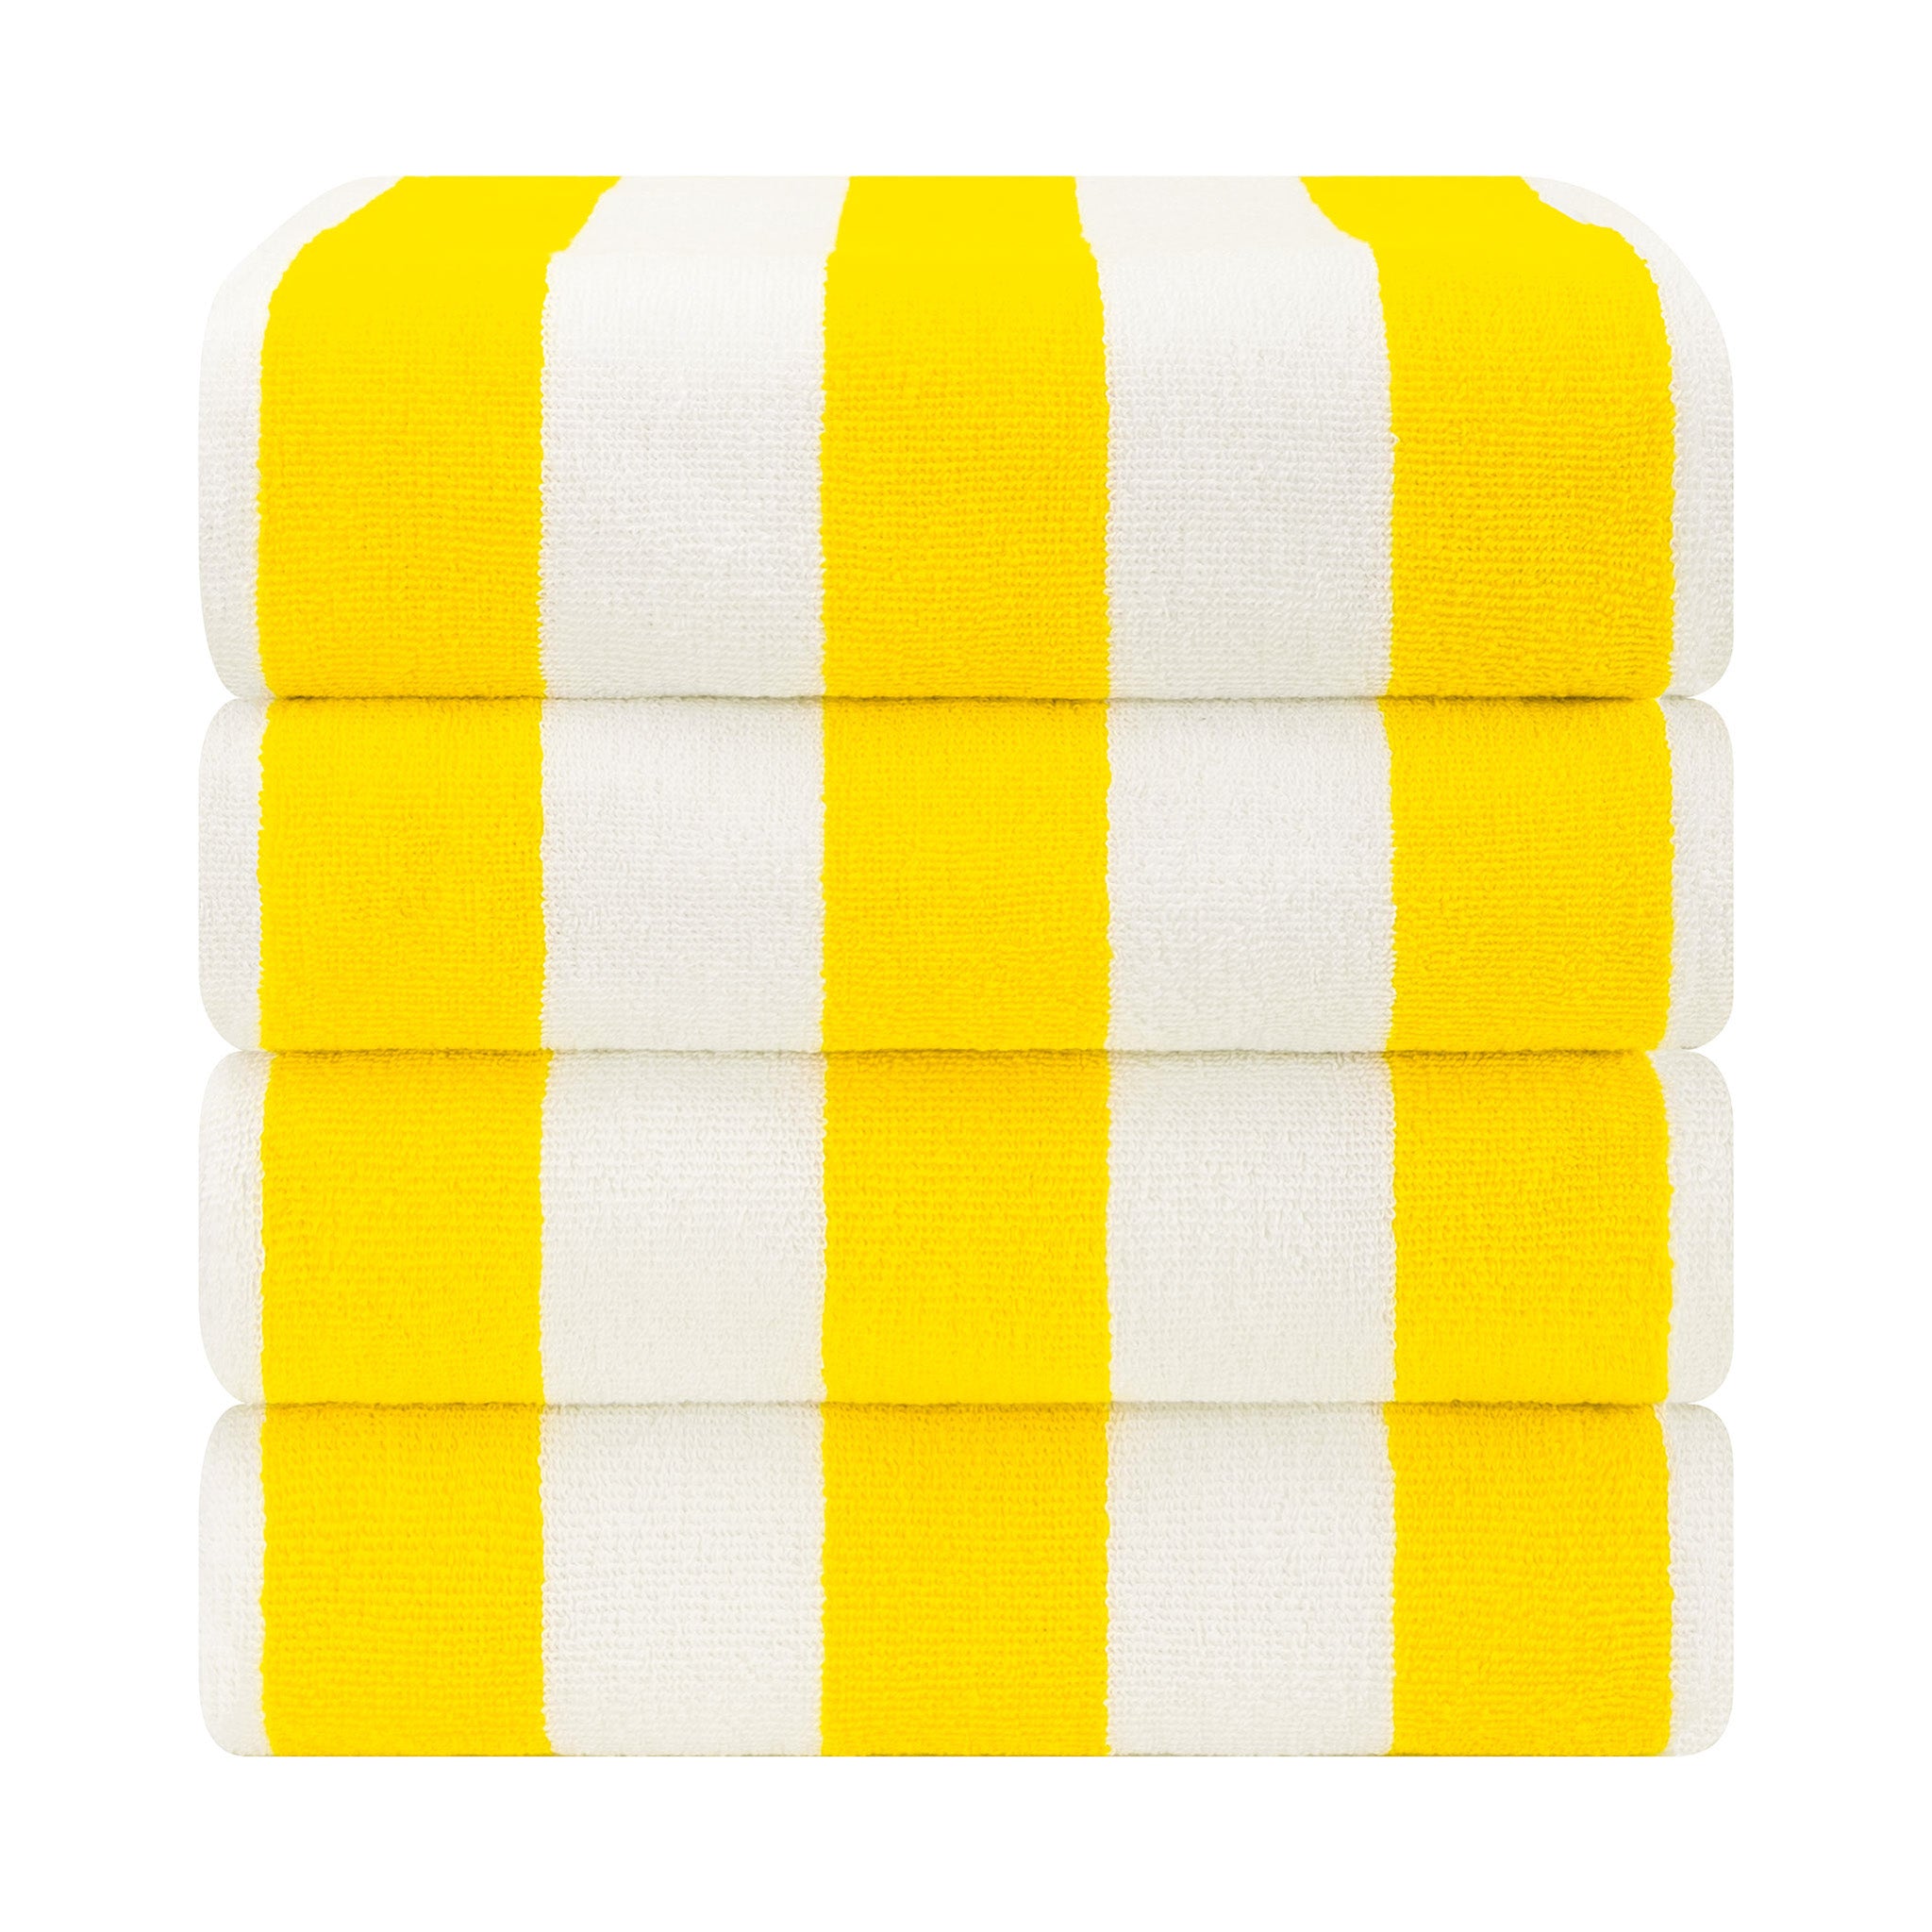 American Soft Linen 100% Cotton 4 Pack Beach Towels Cabana Striped Pool Towels -yellow-2